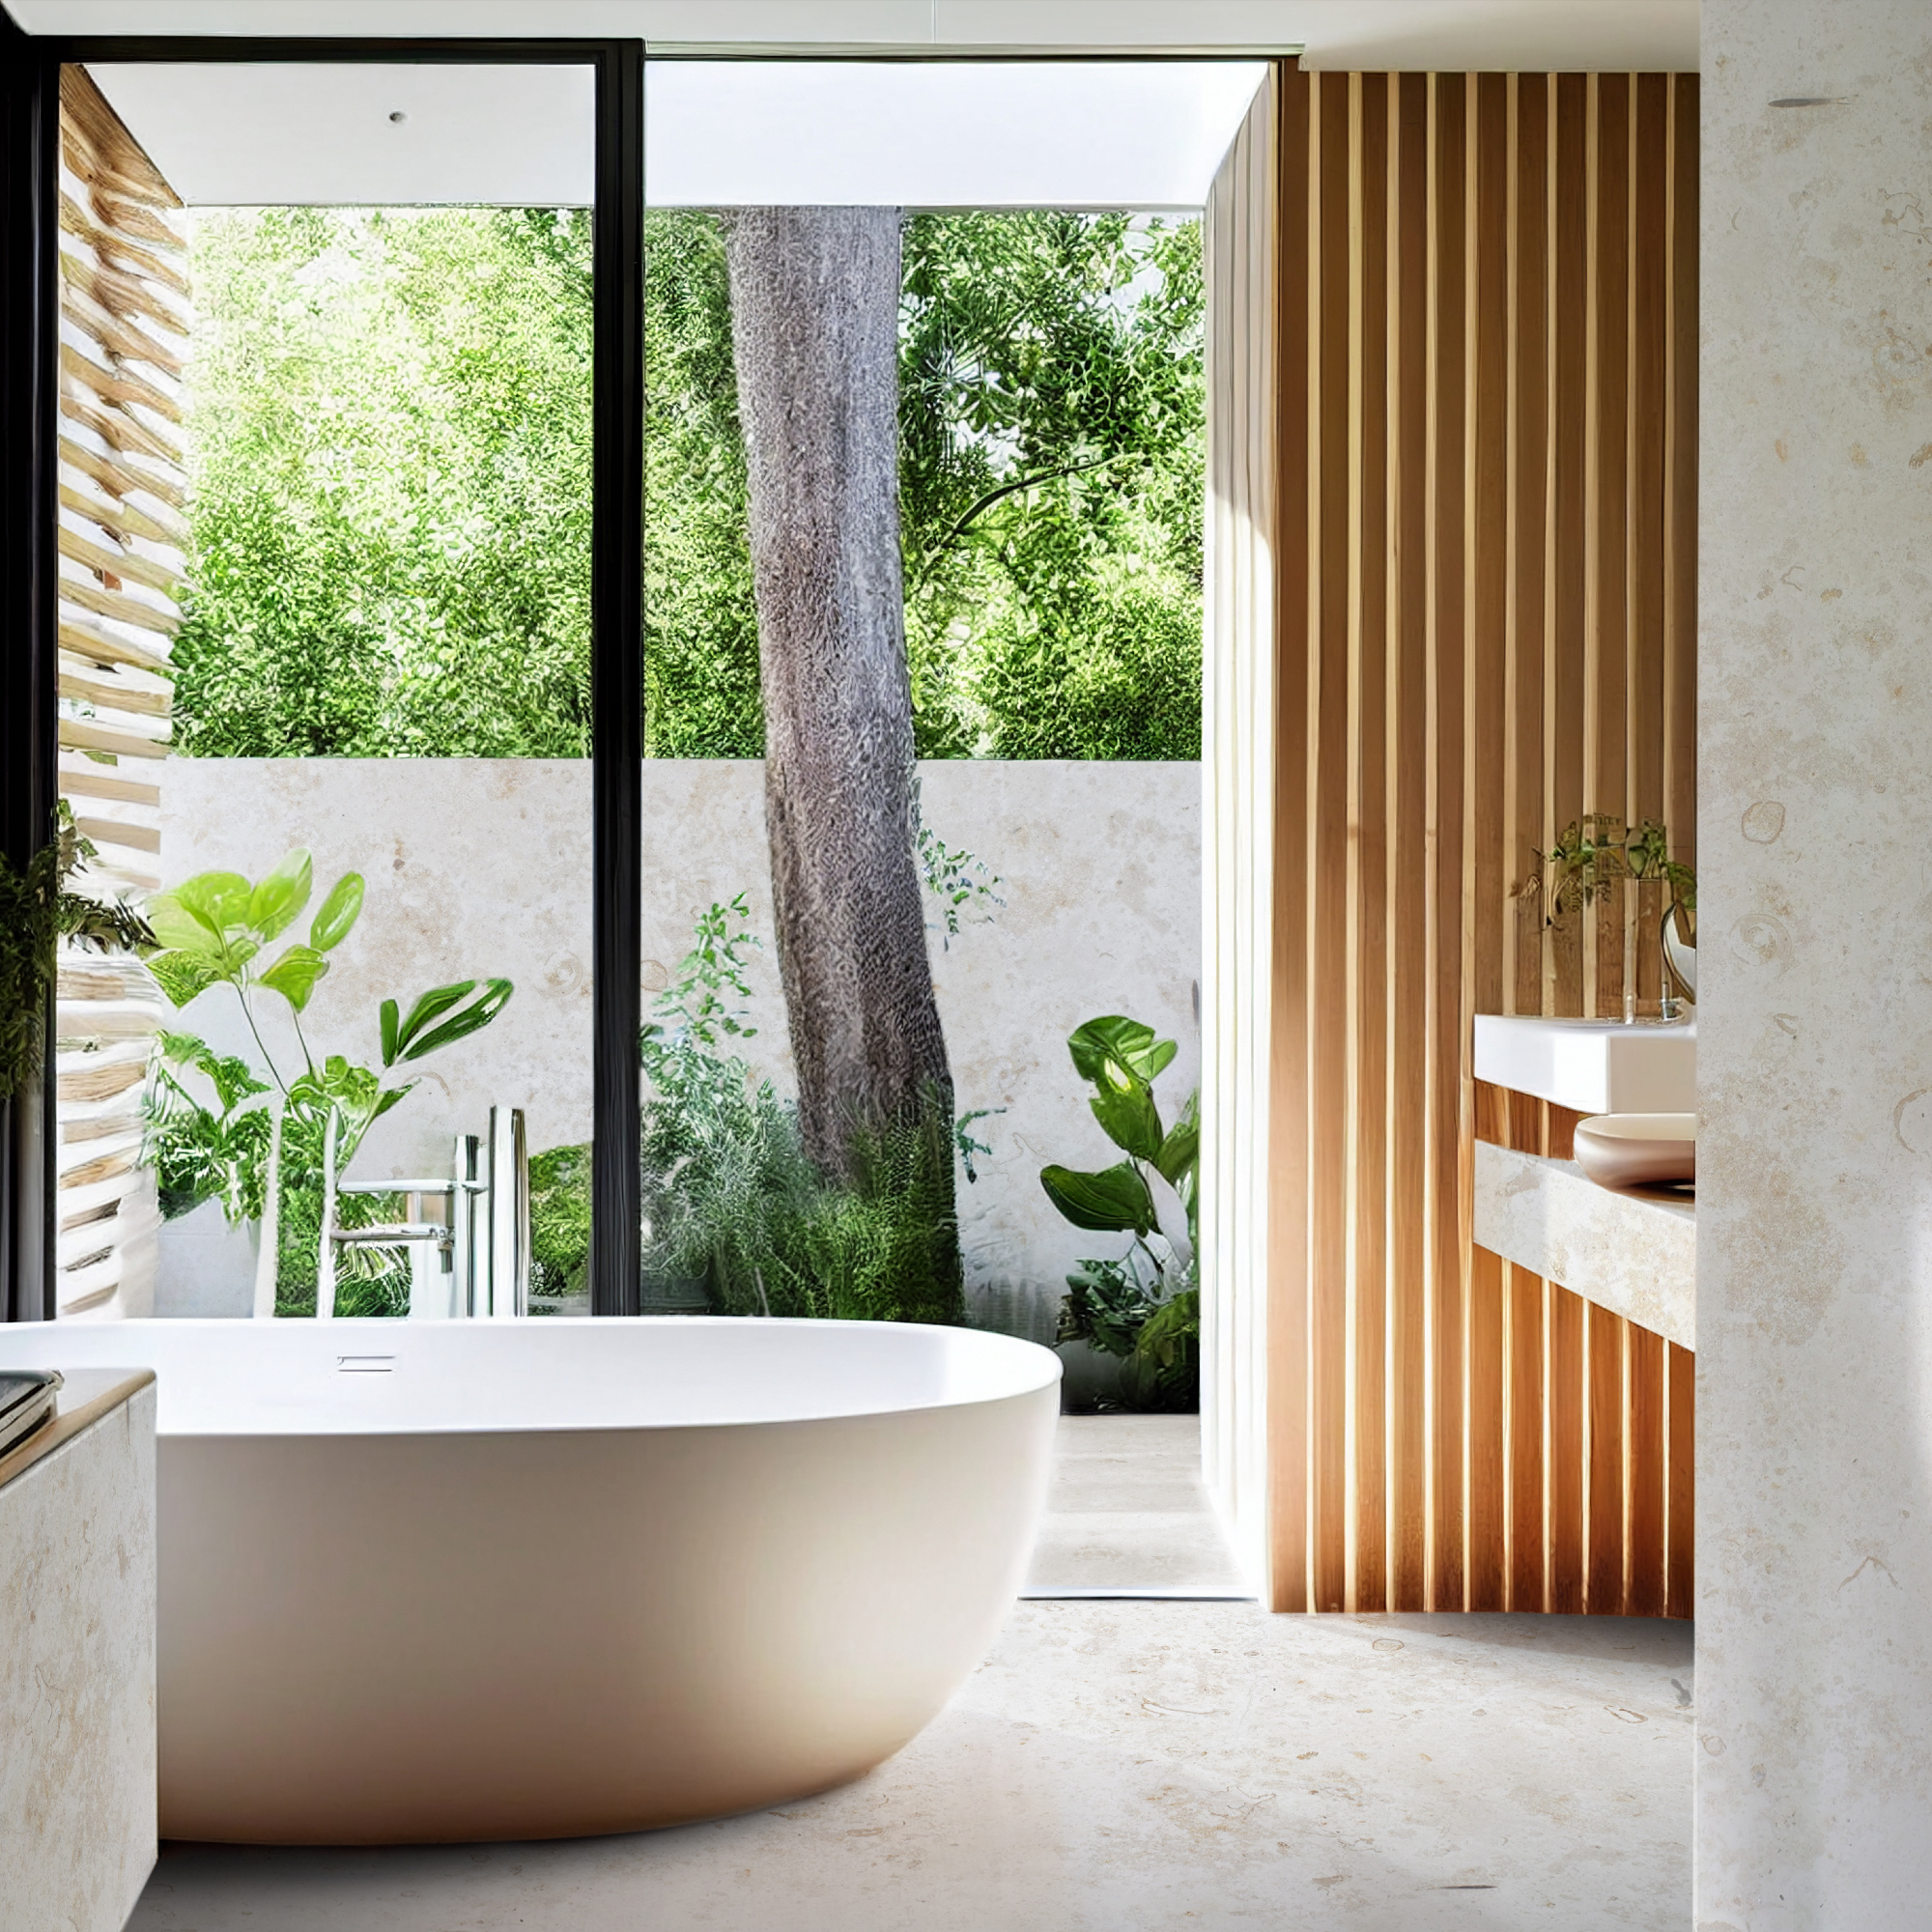 Elevating Home Bath Trends: Modern Luxuries and Comfort